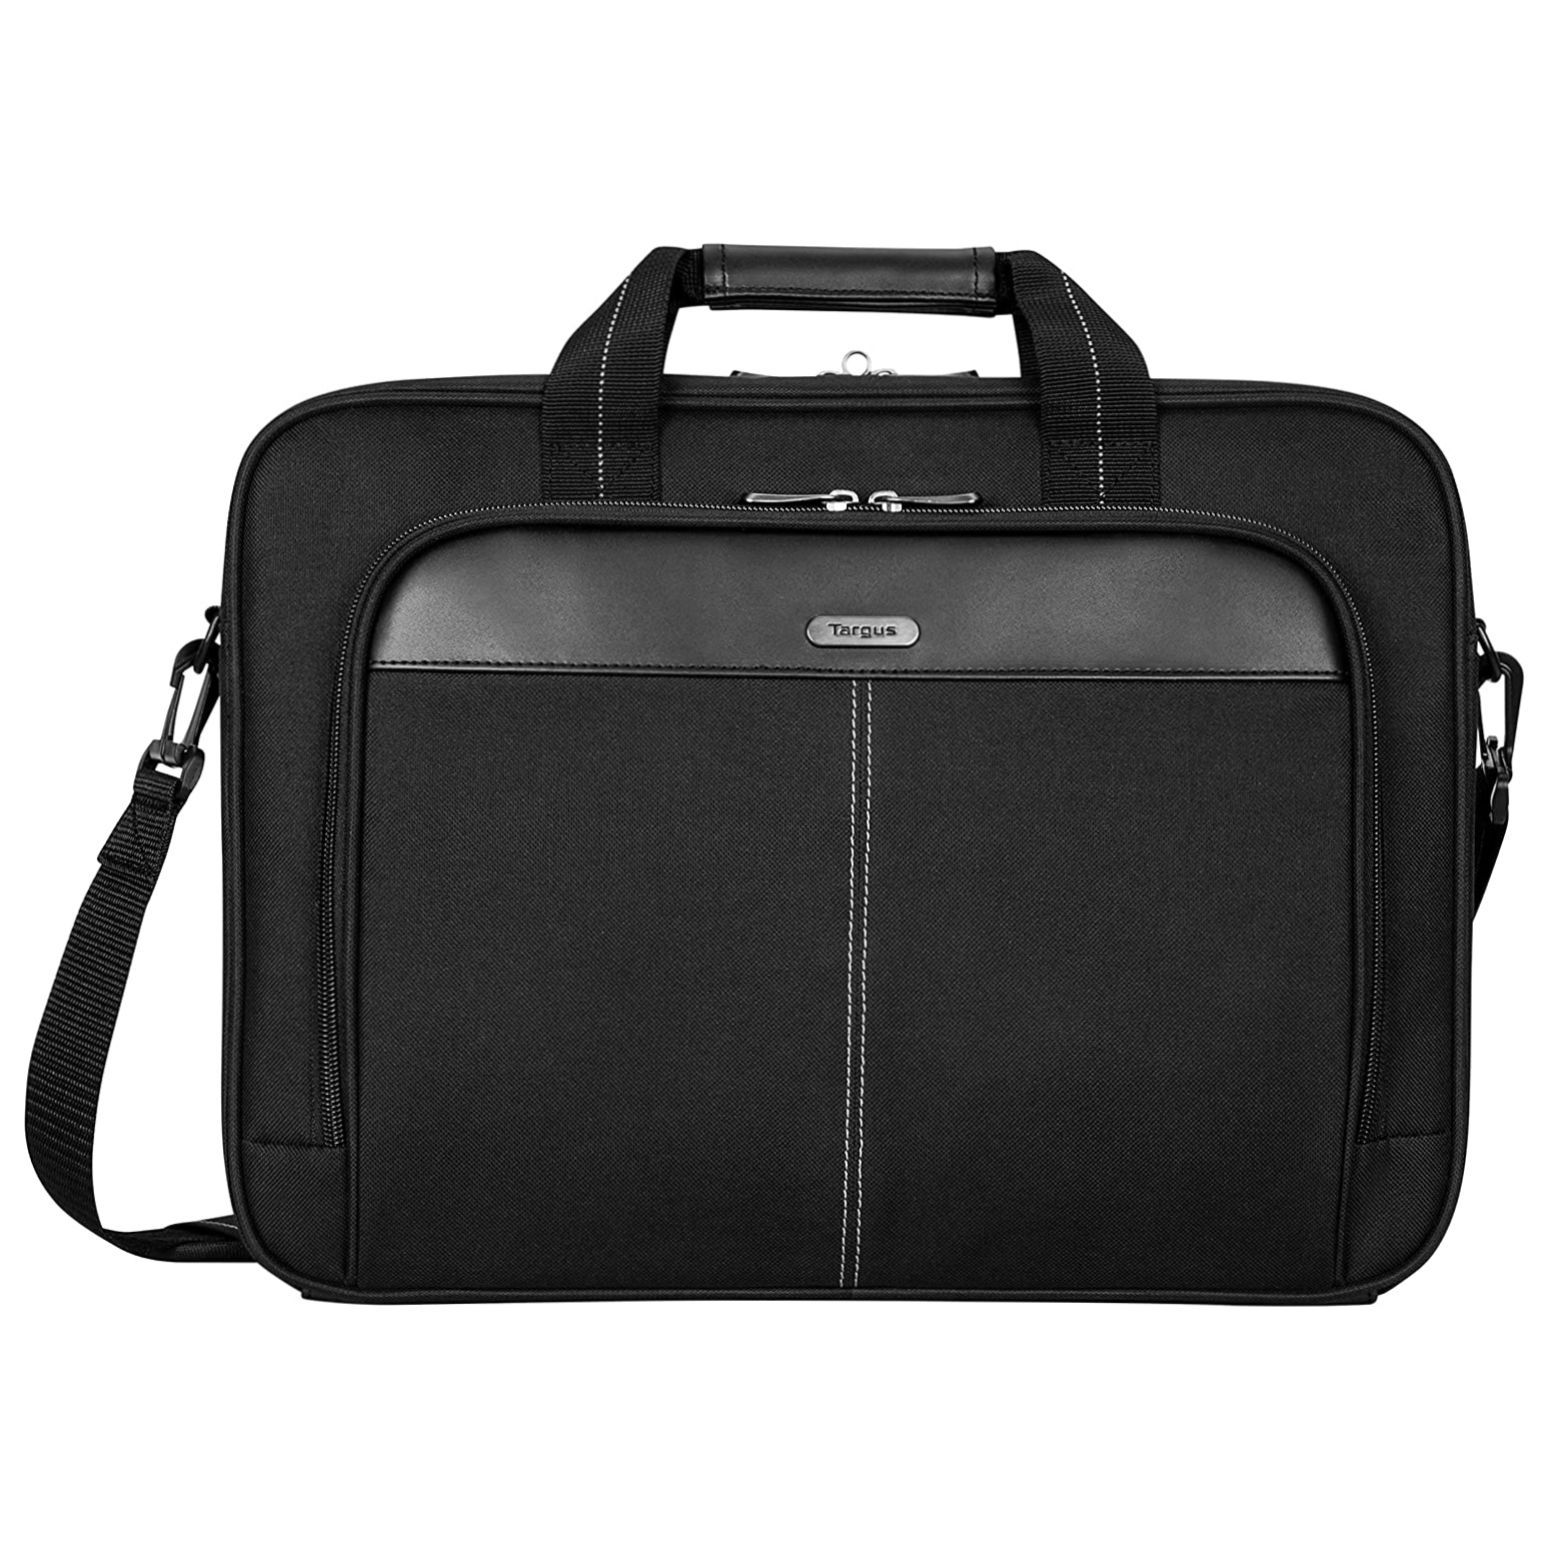 Leather Laptop Bag for 16 inch Laptops